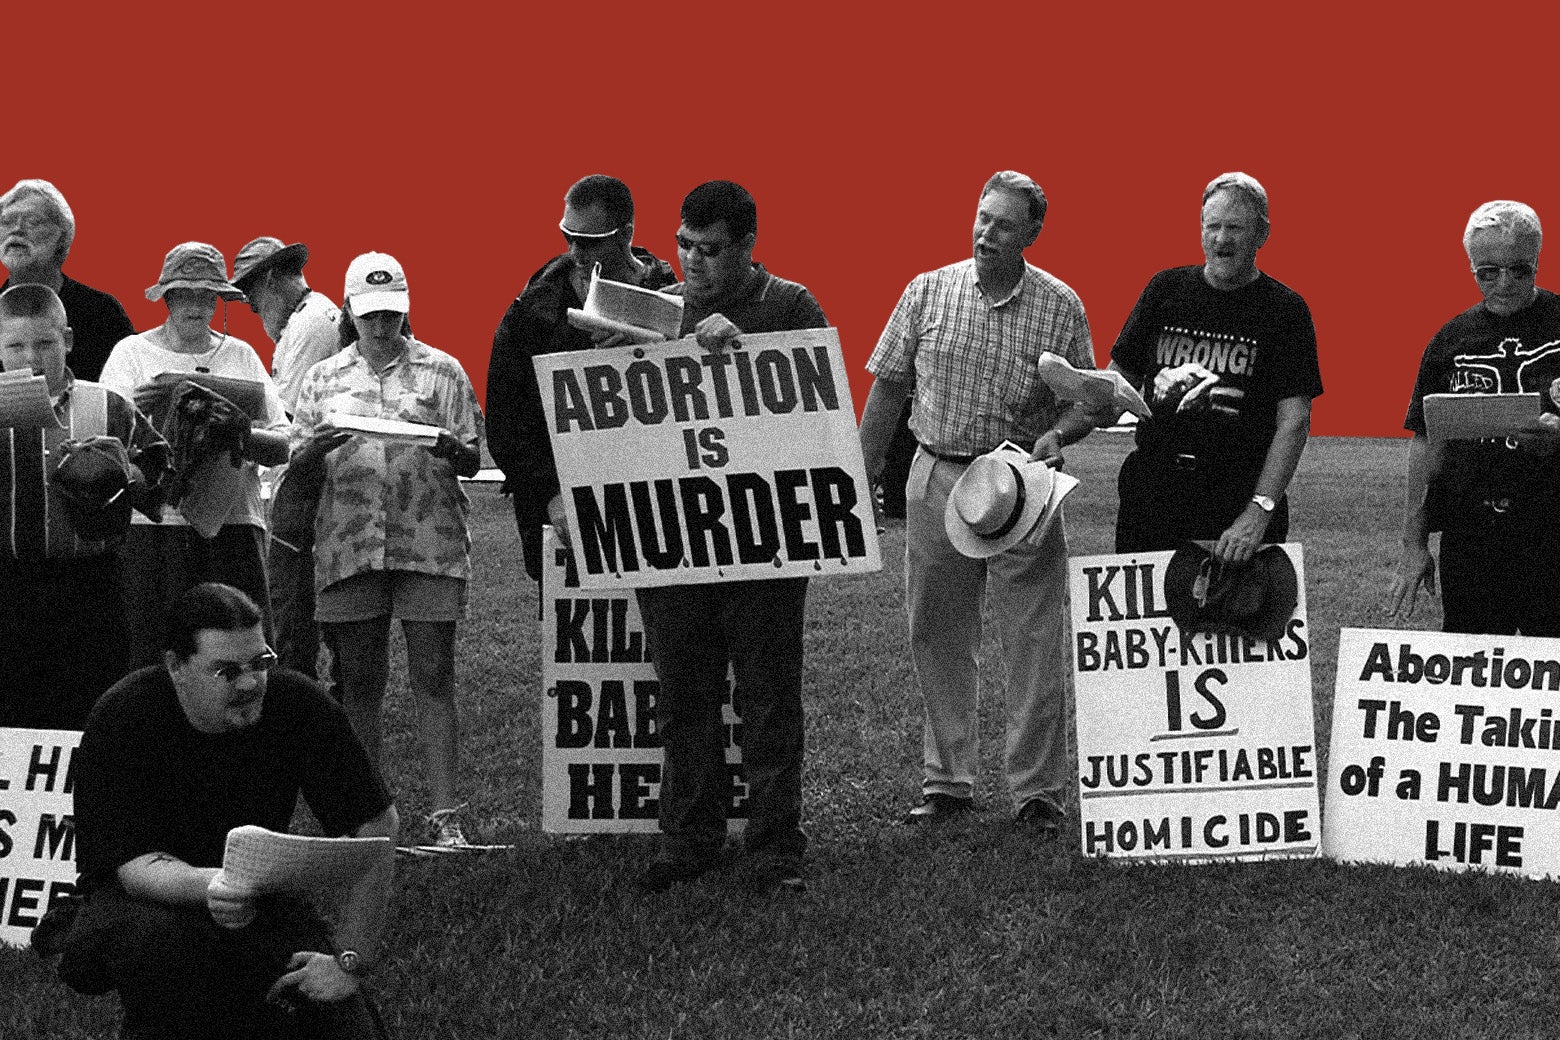 Anti-abortion protesters hold up signs saying "Abortion Is Murder" and "Killing Baby Killers Is Justifiable Homicide."